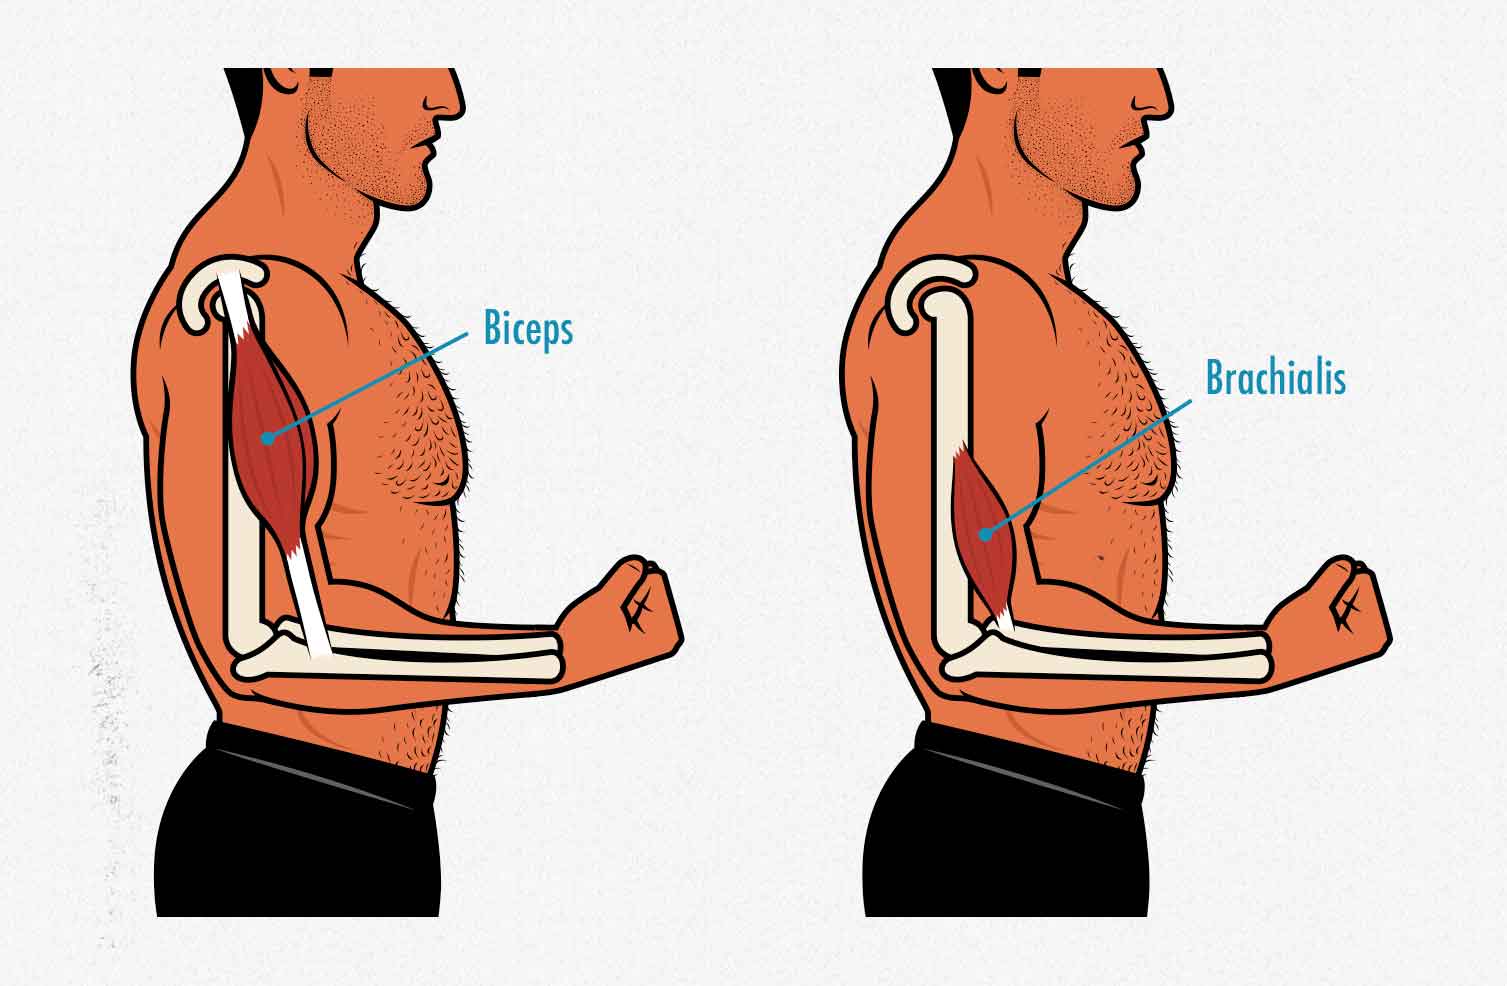 Diagram showing the anatomy of the biceps vs the biceps brachialis as it relates to bodybuilding.